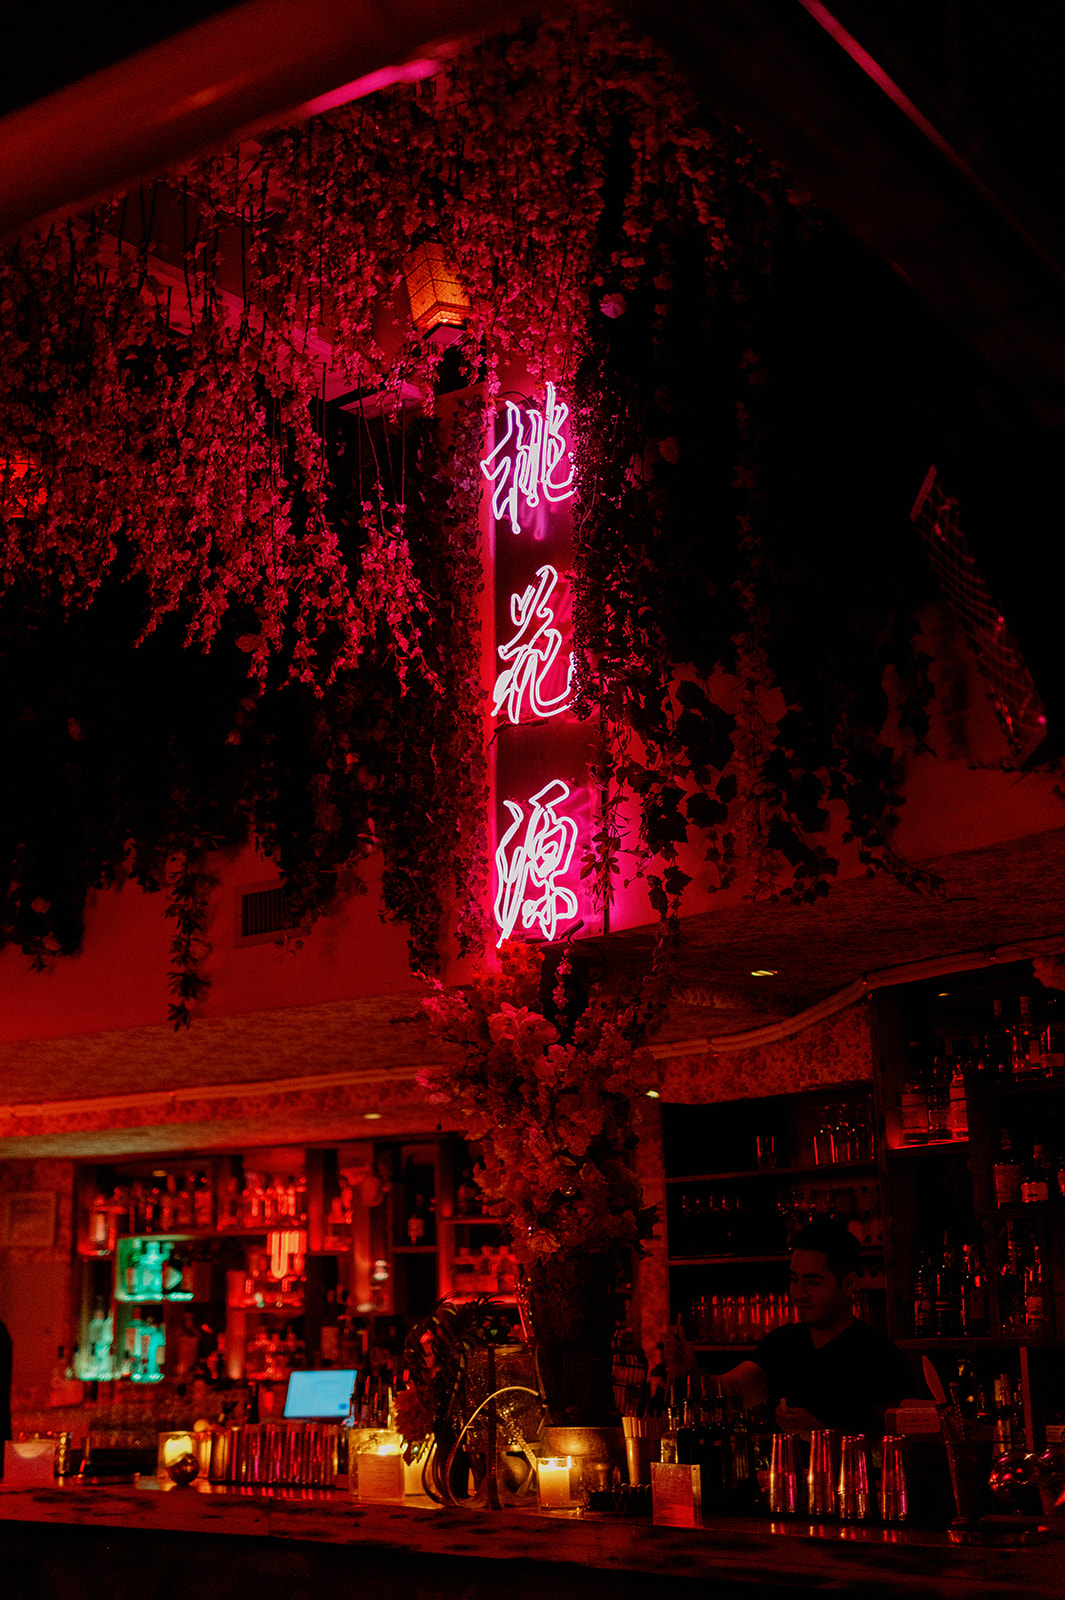 Peachy's bar in Chinatown, NYC.